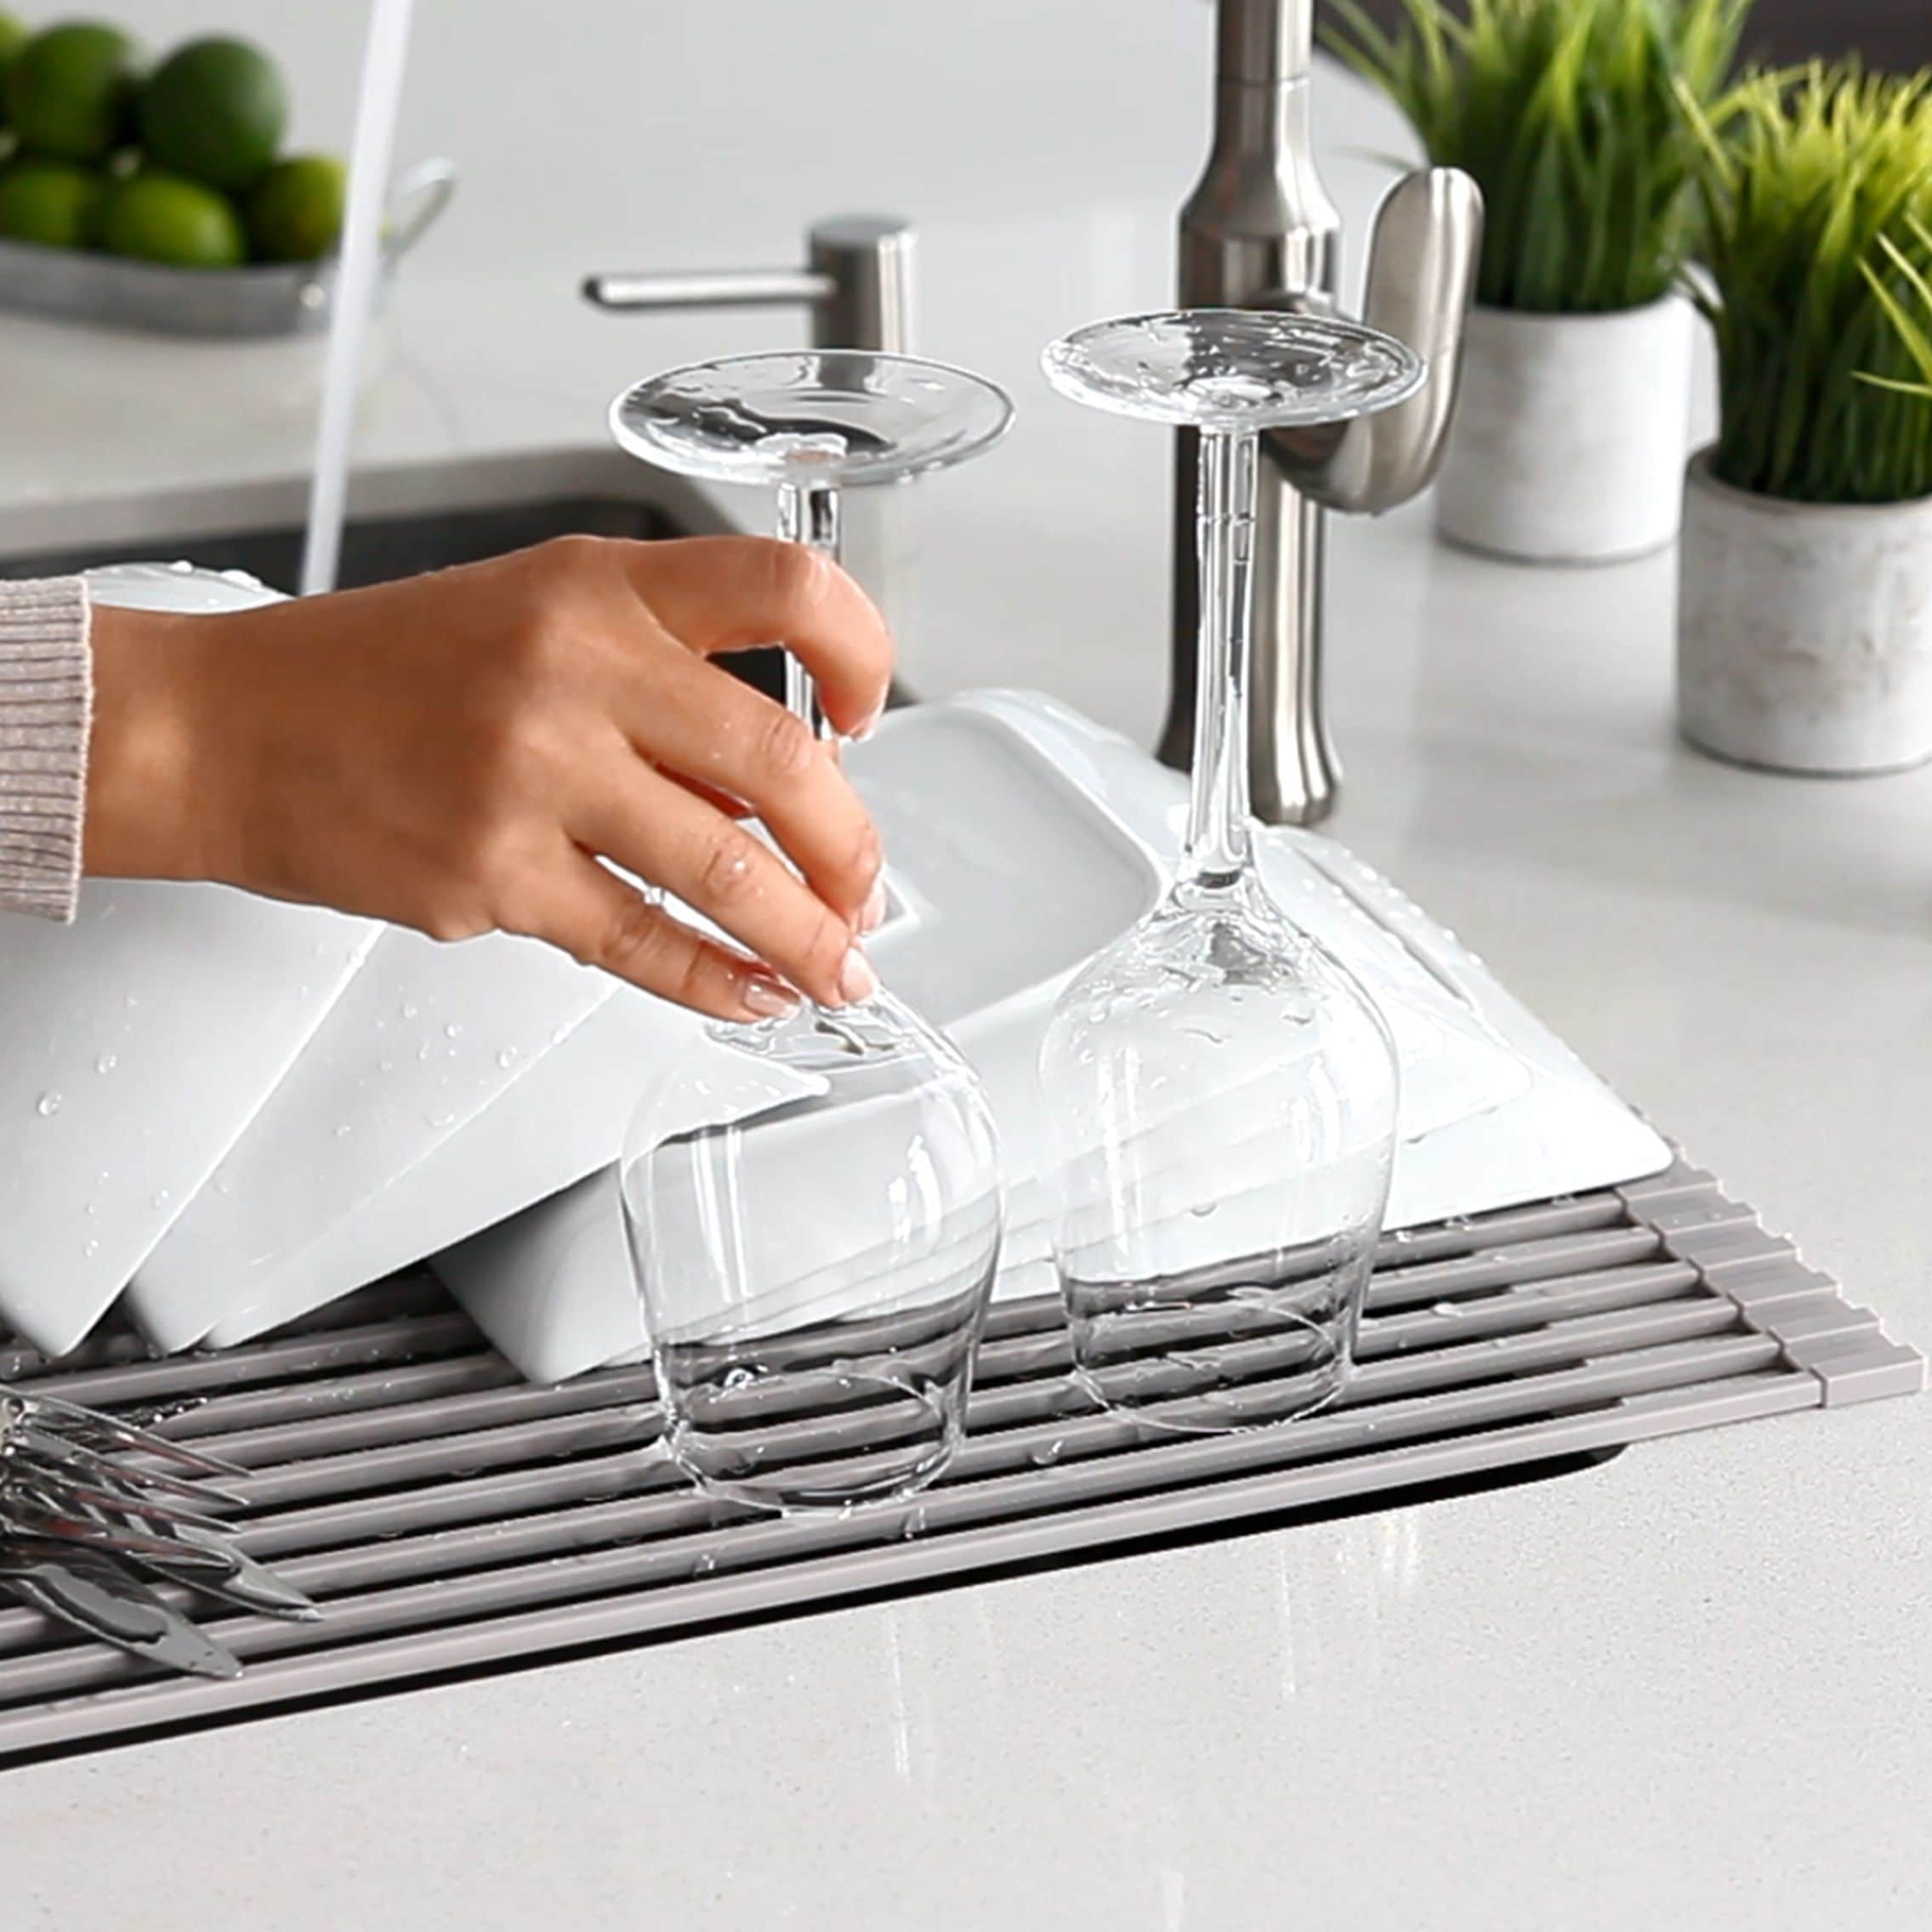 https://ak1.ostkcdn.com/images/products/is/images/direct/89f29cefebd3a77da7a1e502a303eec516067949/STYLISH-Multipurpose-Over-Sink-Roll-Up-Dish-Drying-Rack.jpg